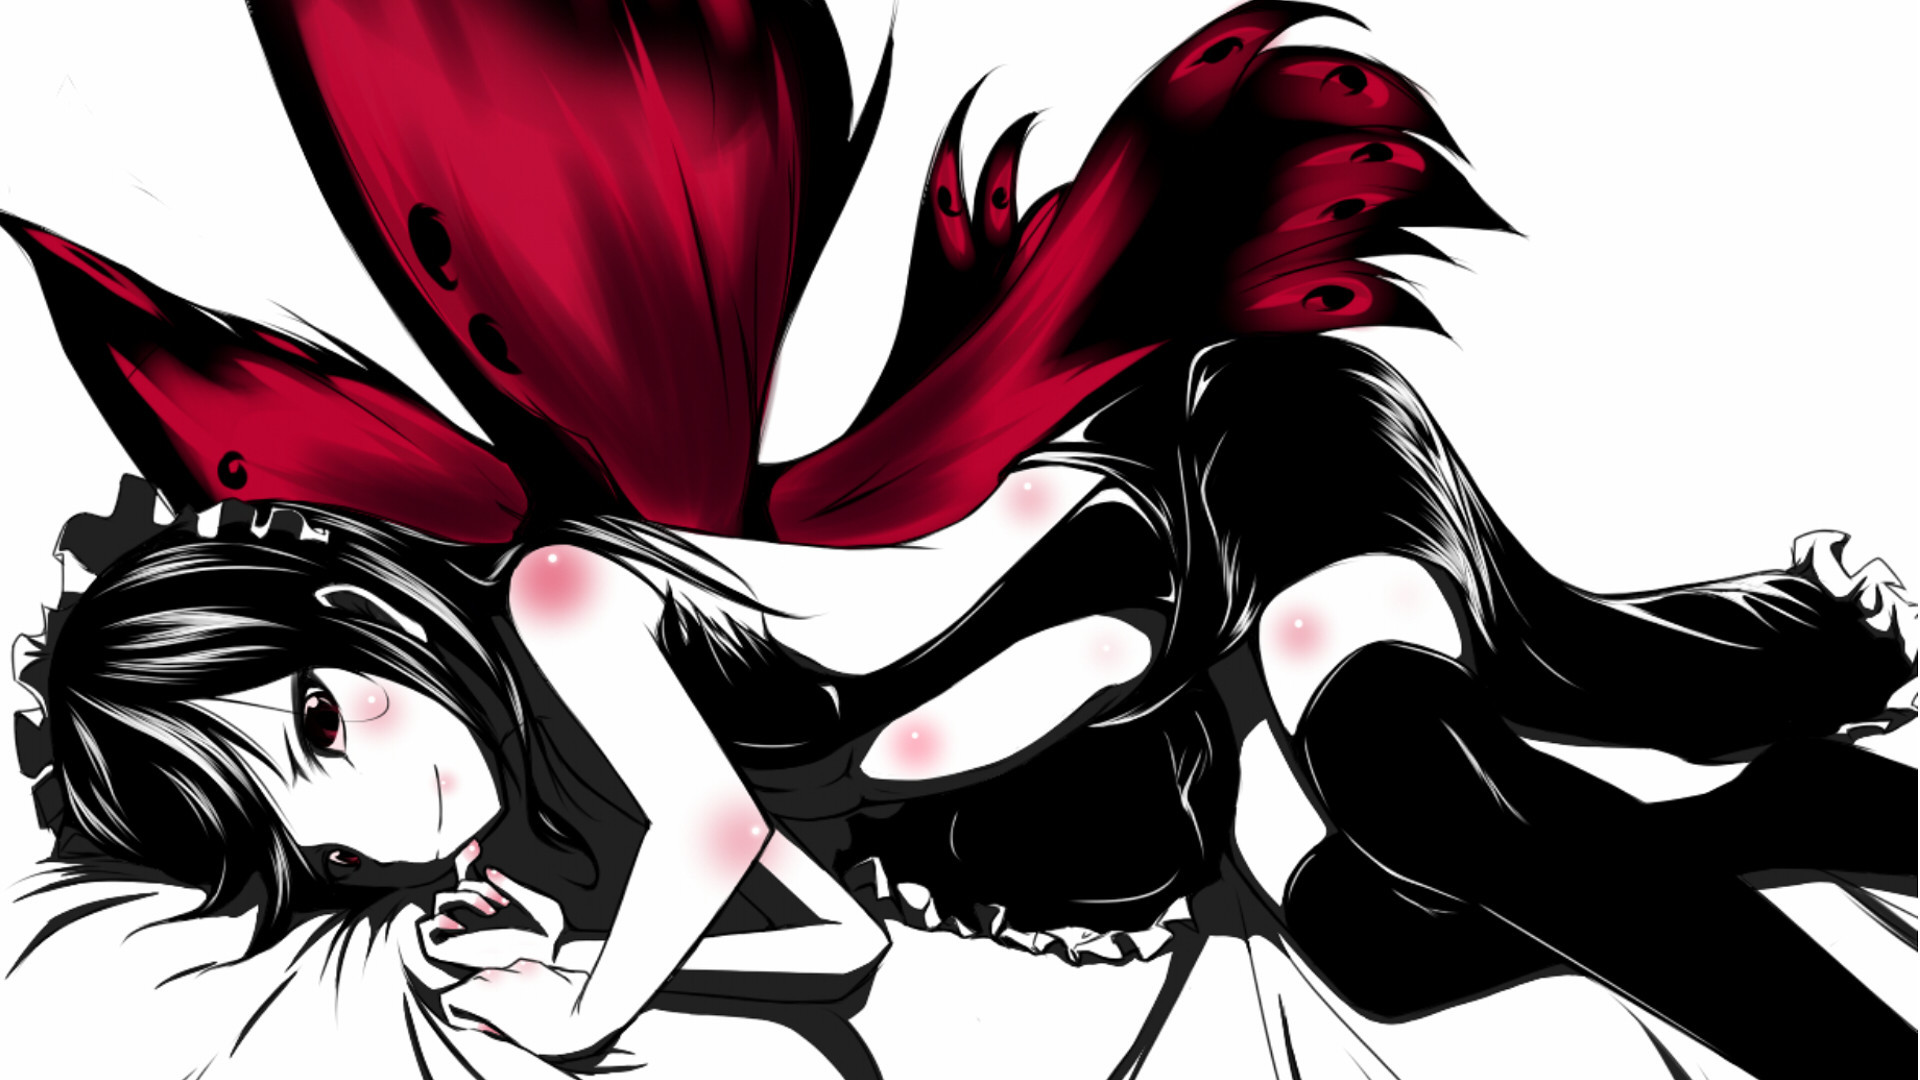 Anime Girl Black and Red Wallpaper